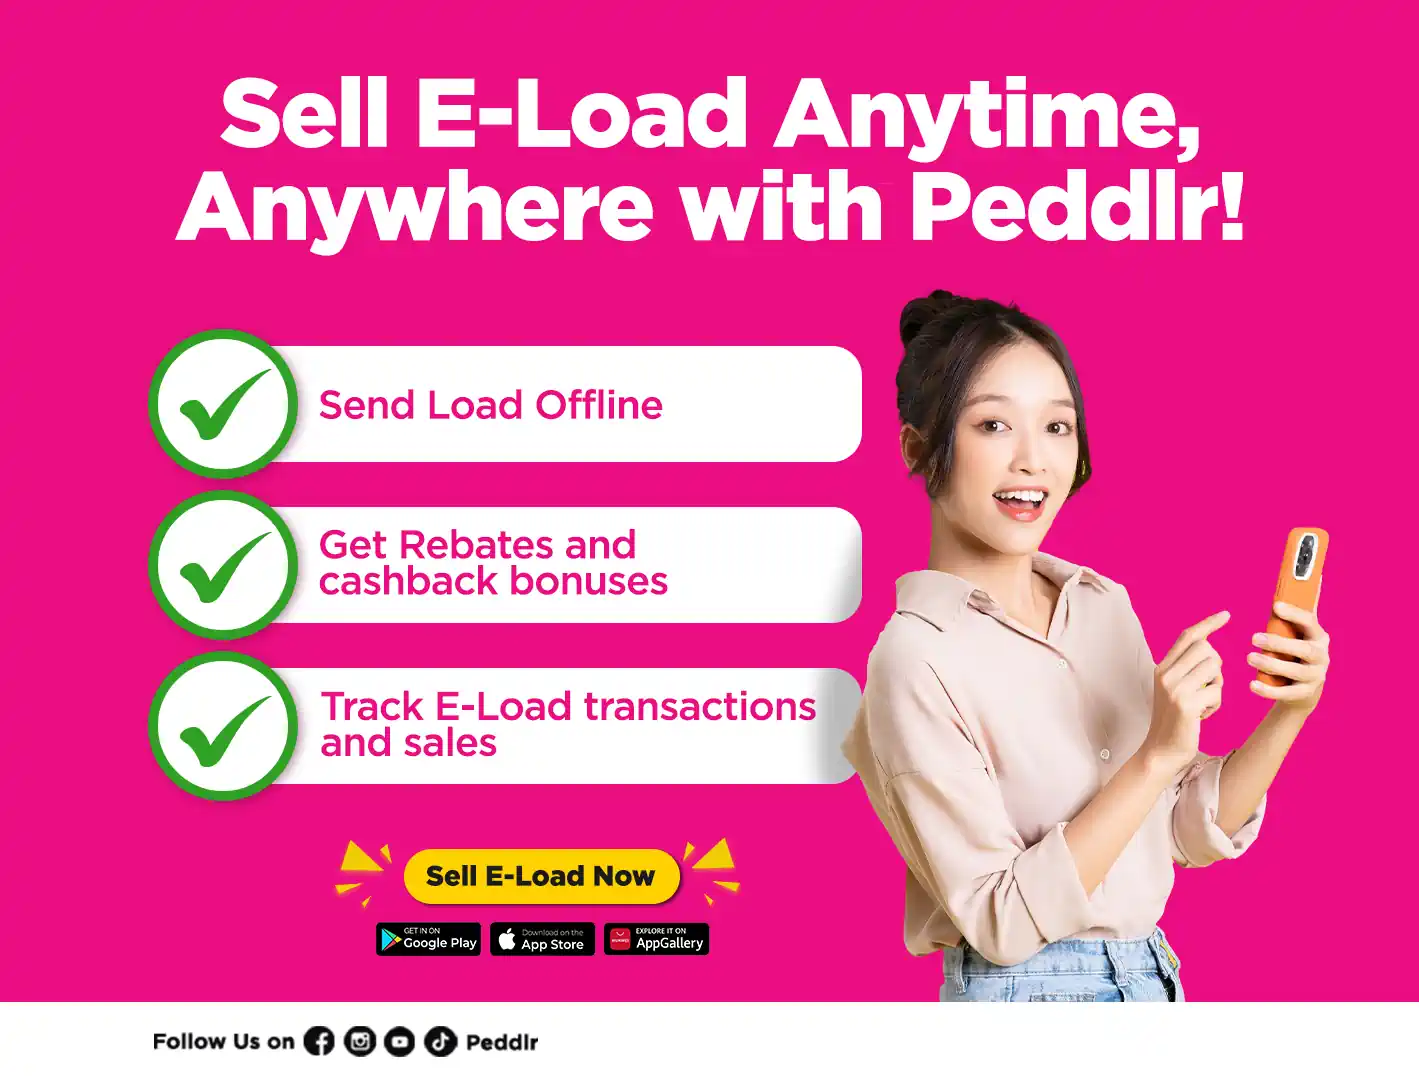 Girl holding a phone to sell e-load and using peddlr mobile pos app.